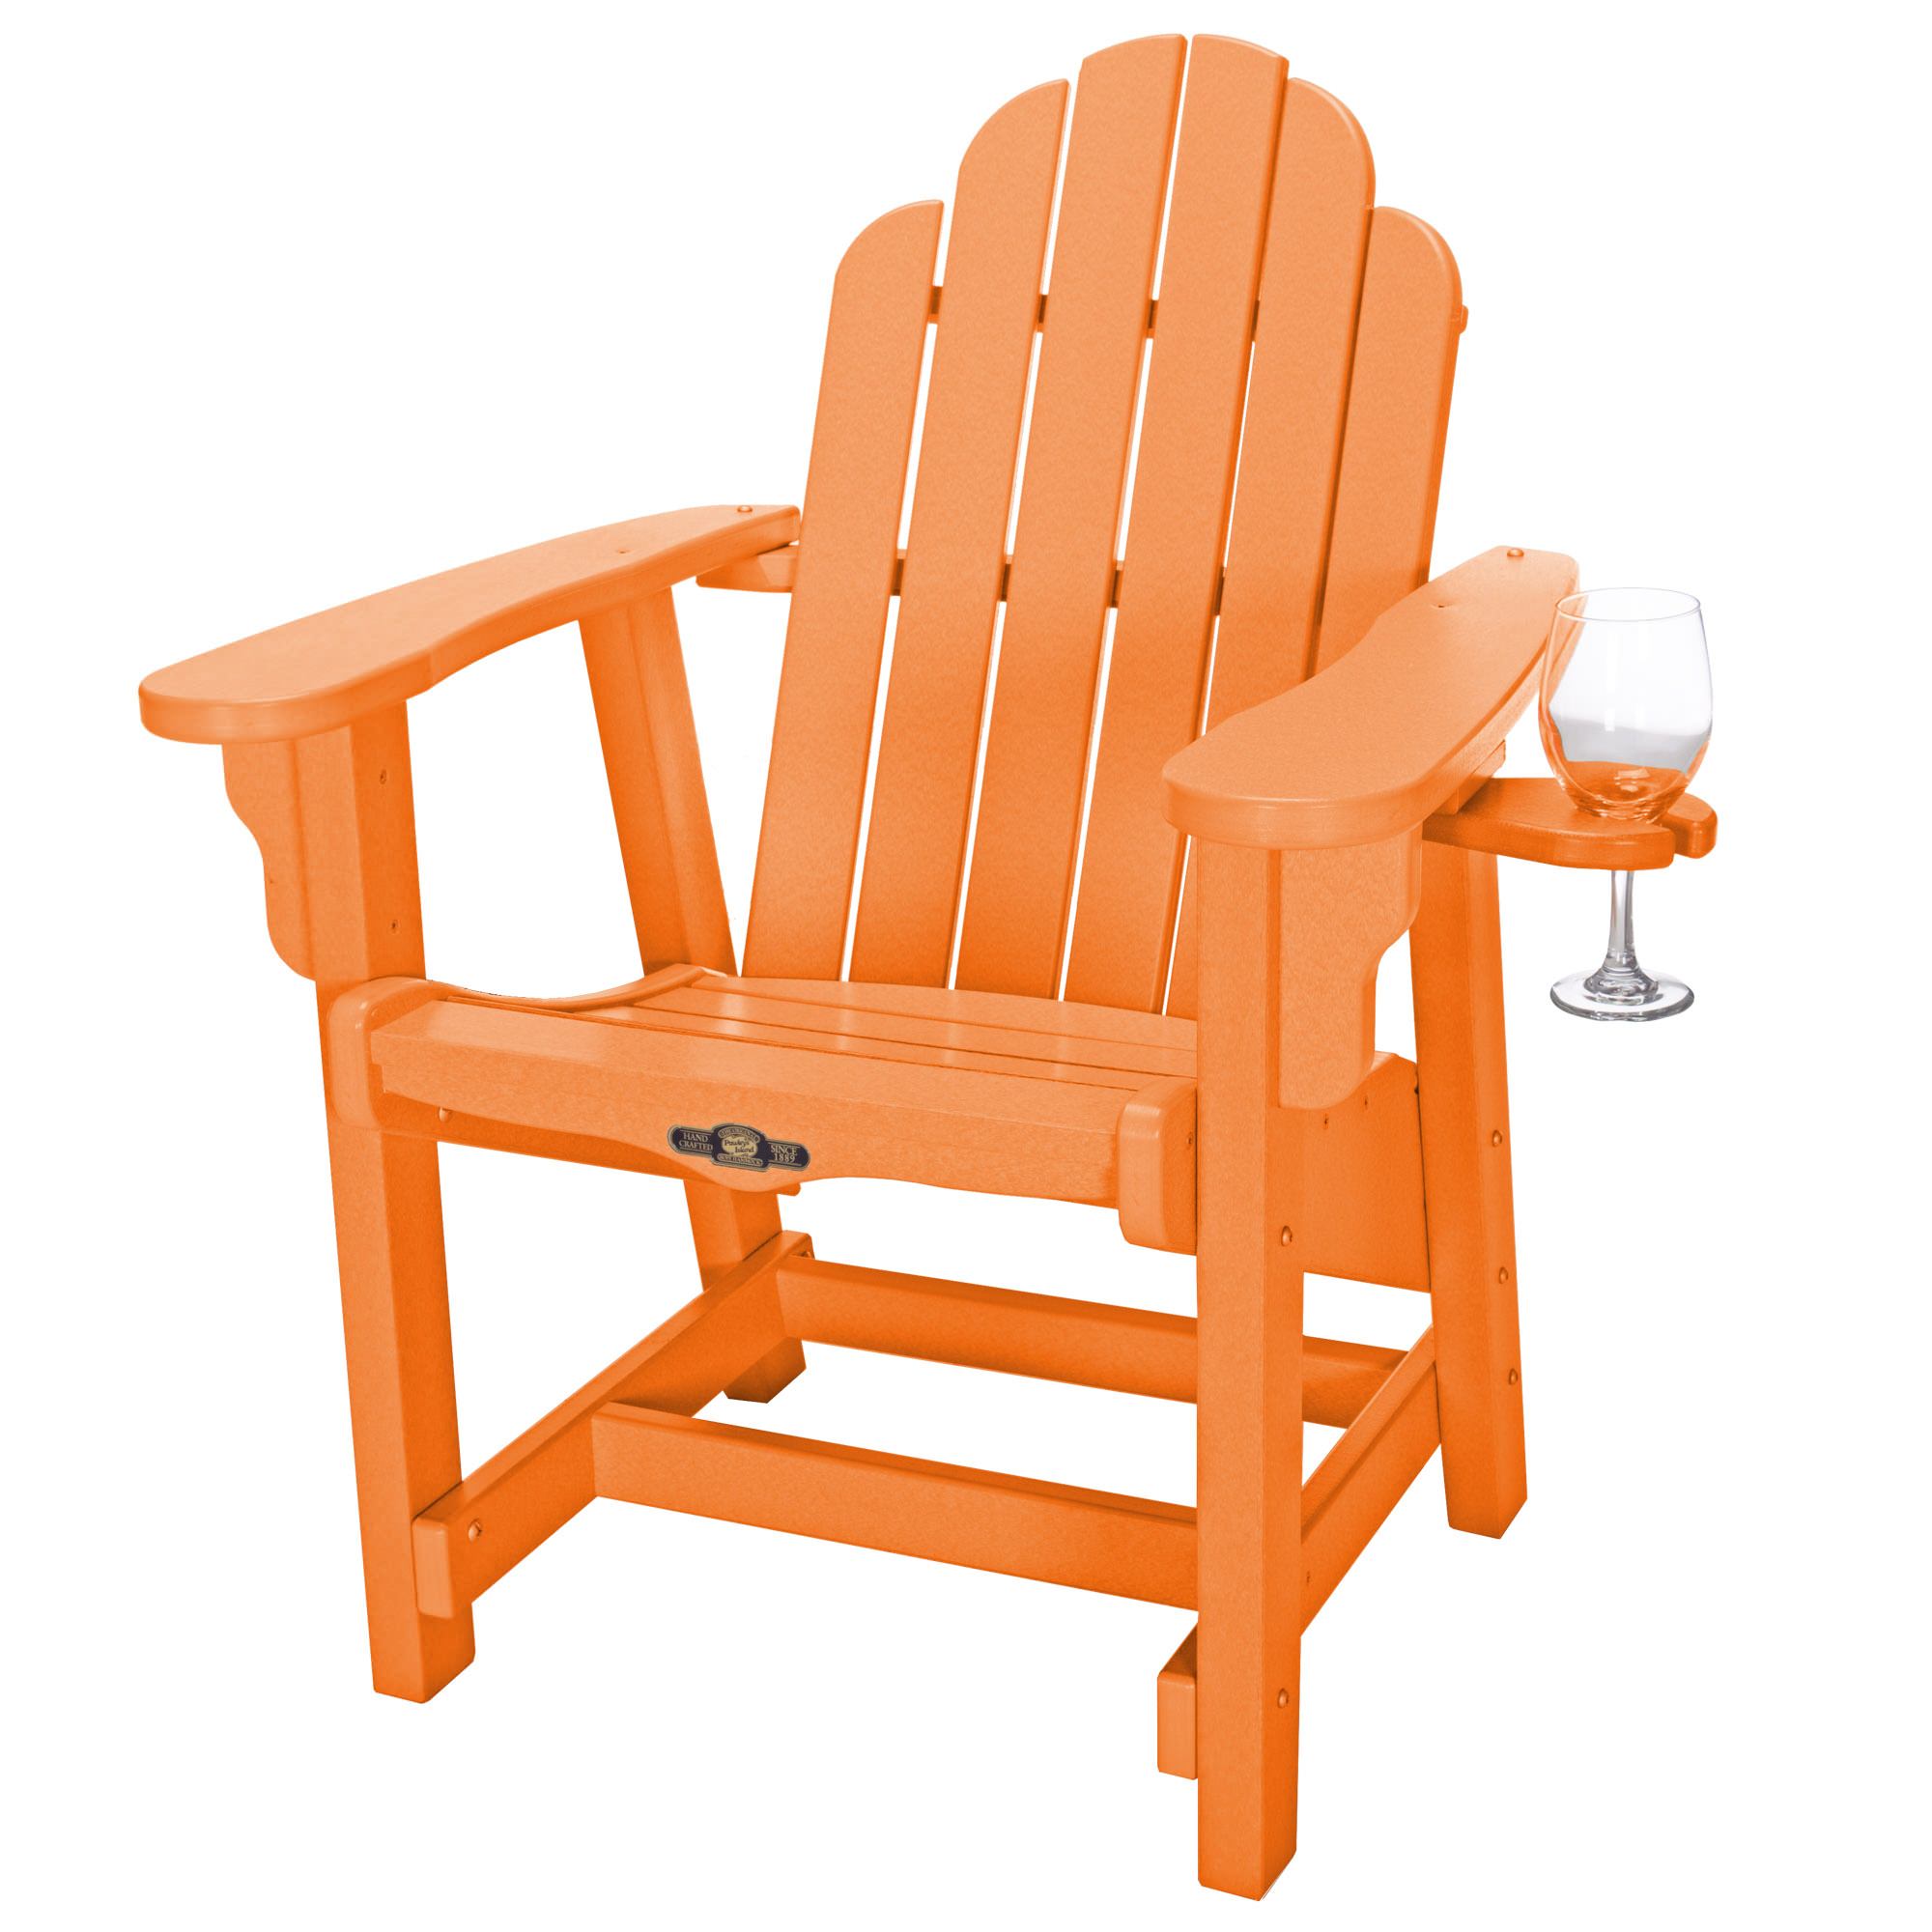 Durawood Wine Holder On Sale Shop Patio Furniture Wh1 K